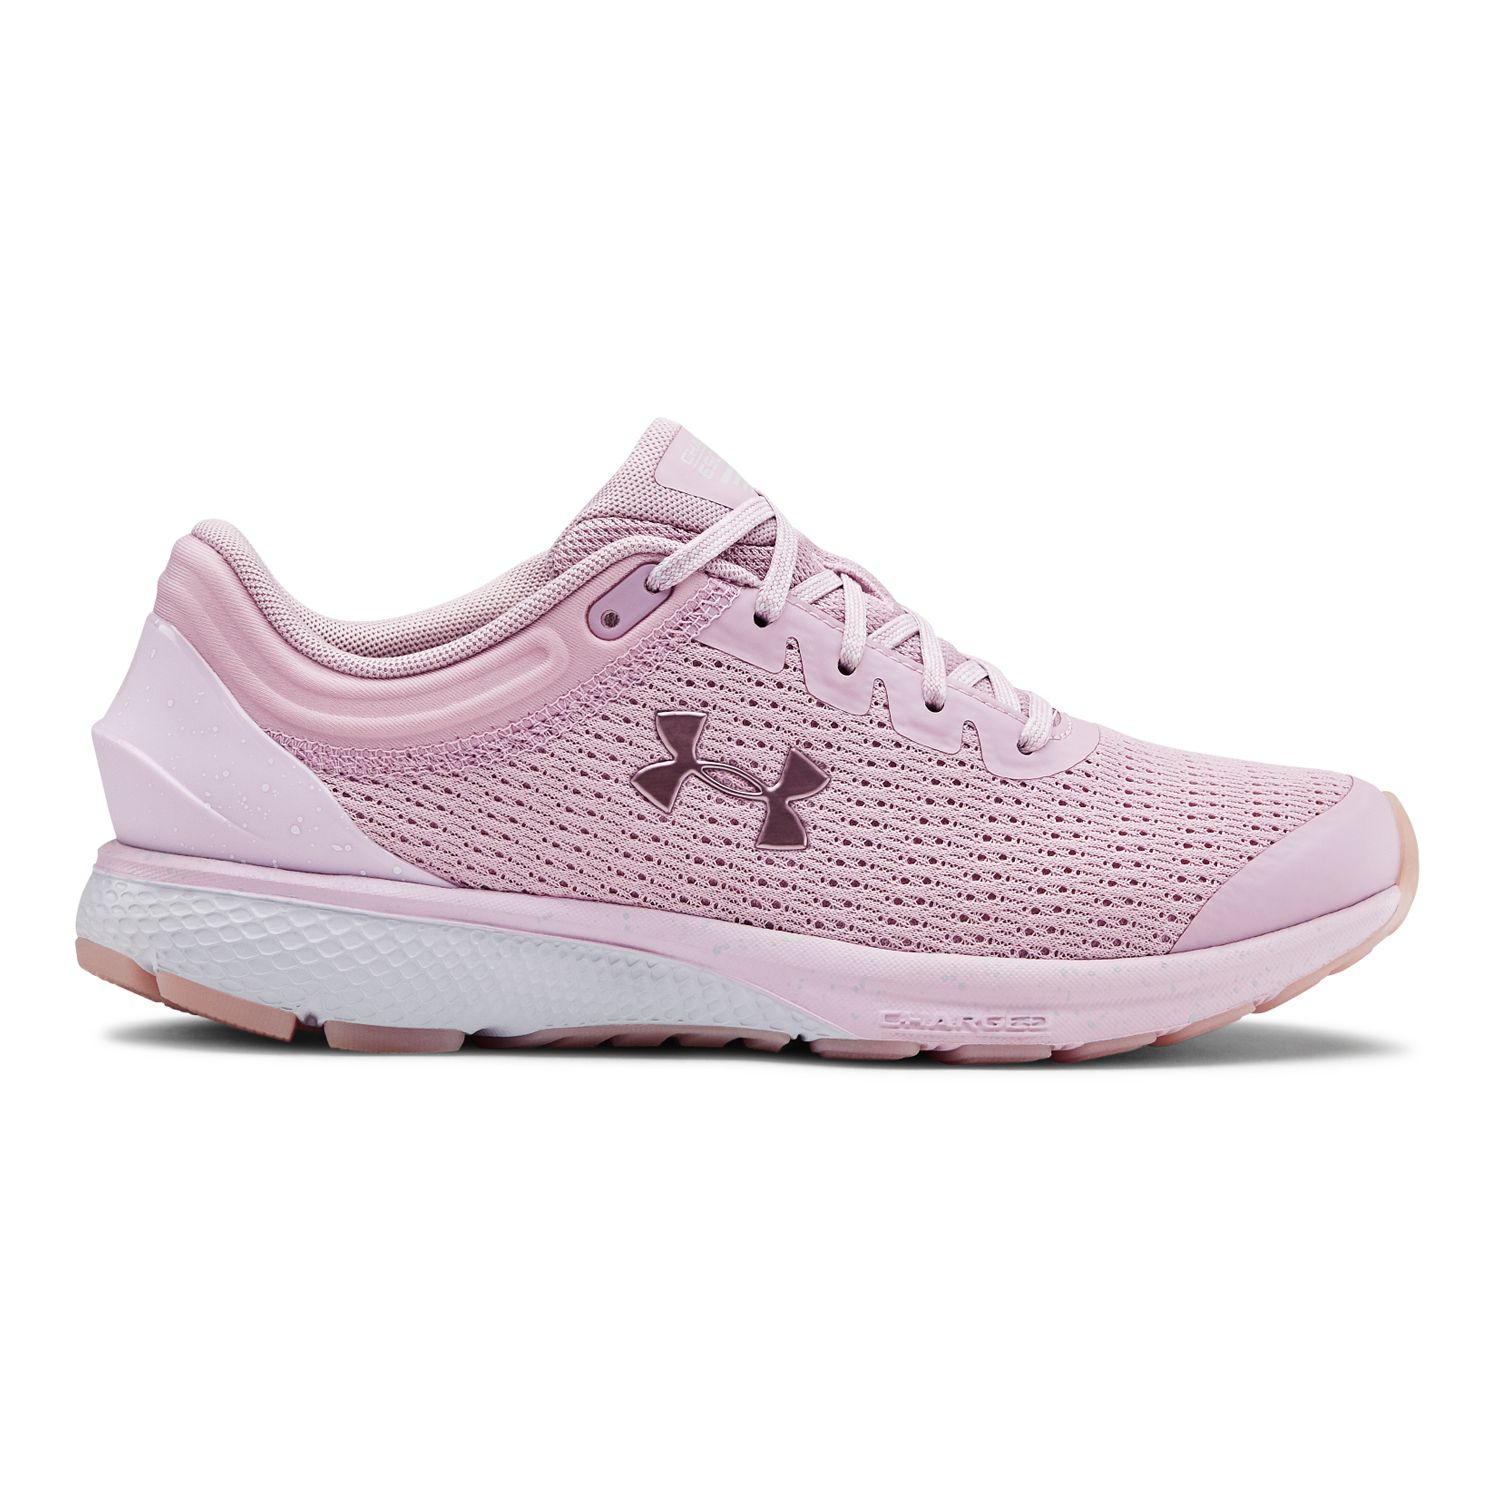 kohl's shoes under armour